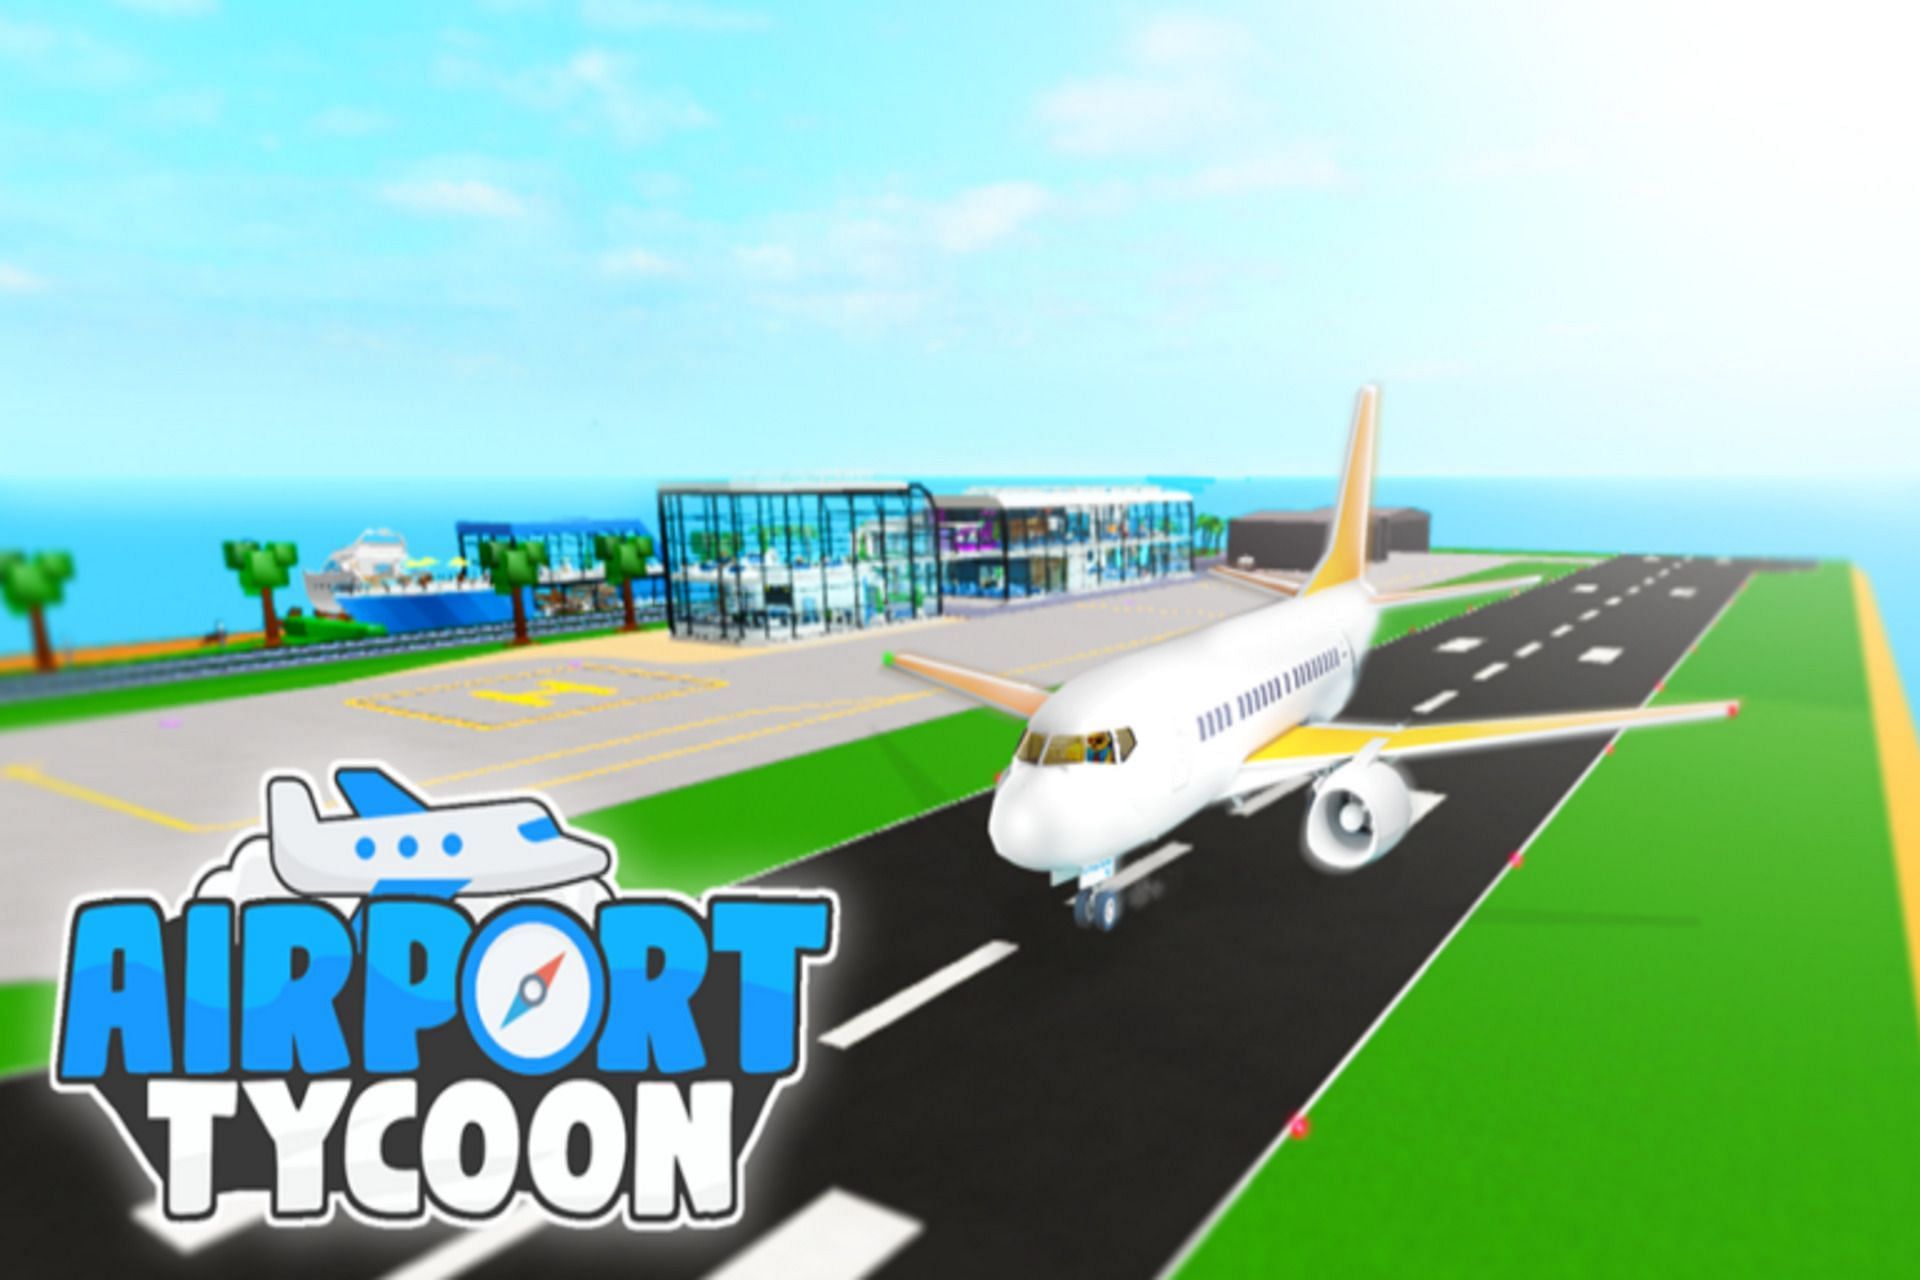 Redeem these active codes to construct your own cool airport in Airport Tycoon (Image via Roblox)